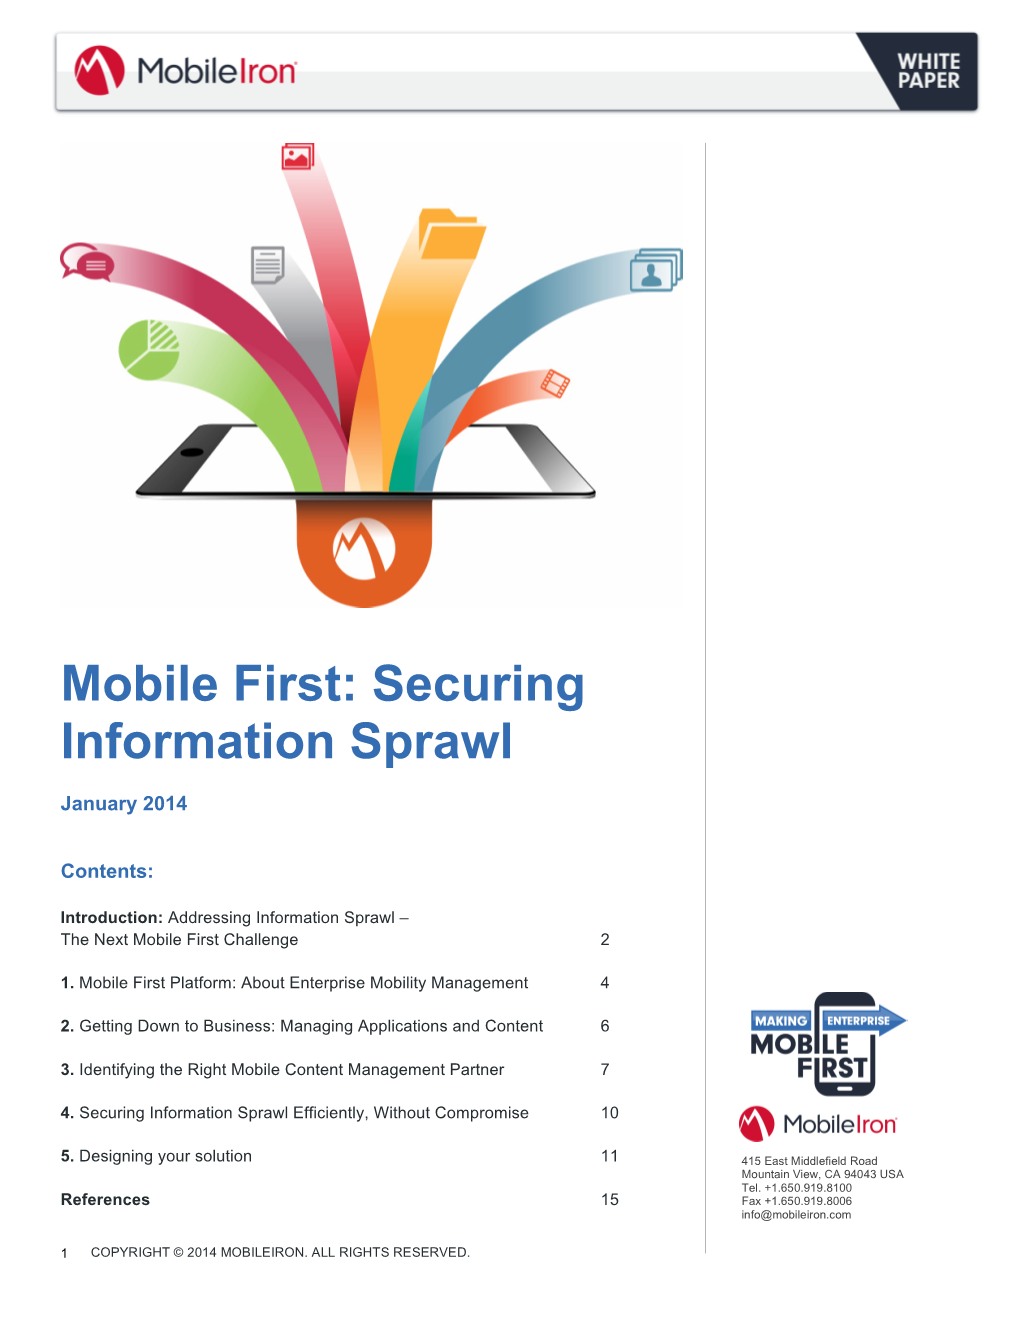 Mobile First: Securing Information Sprawl